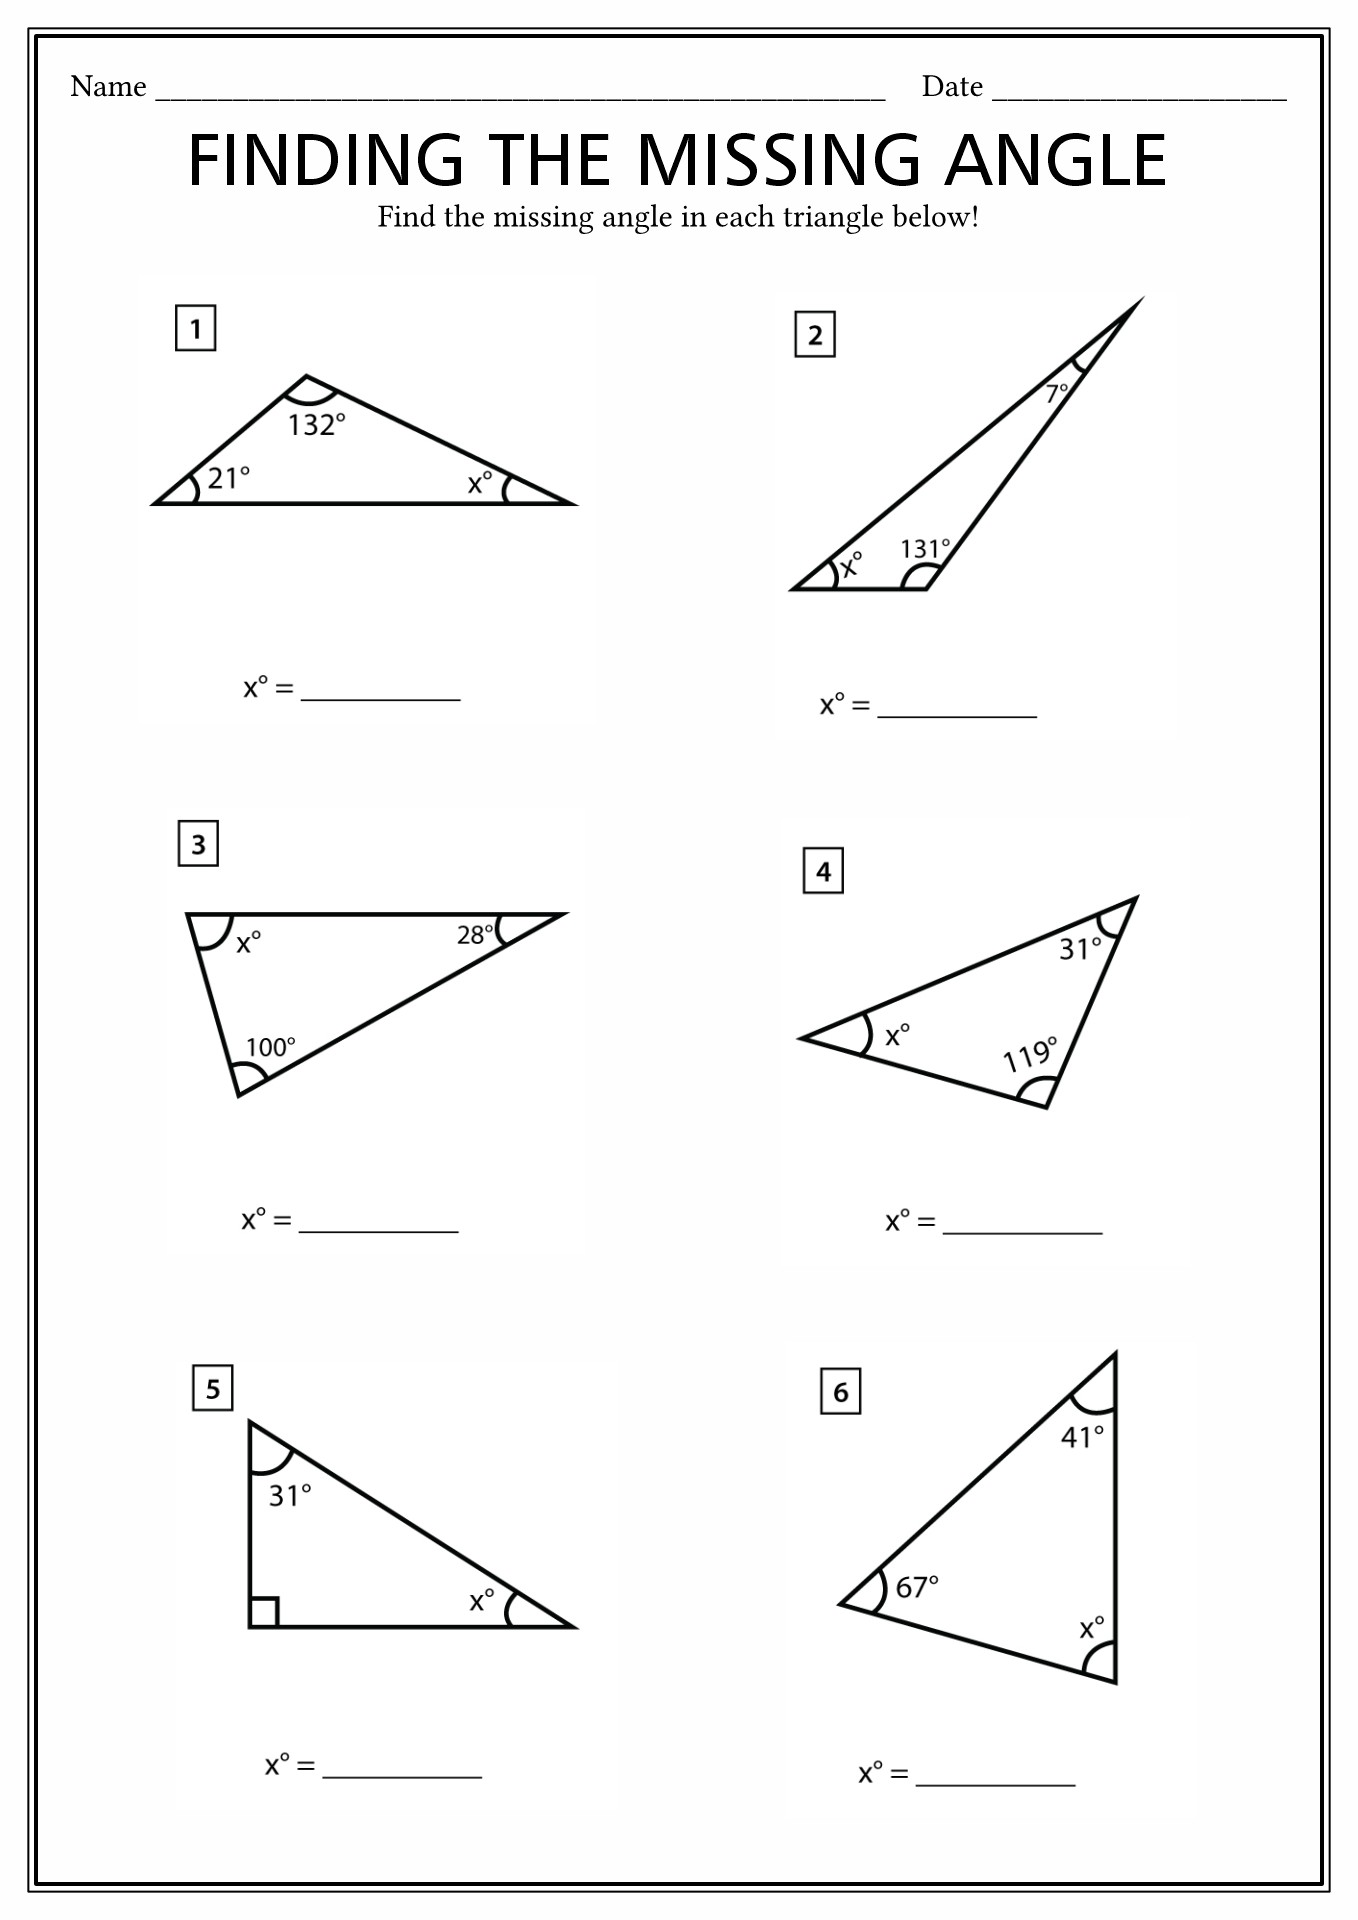 Right Triangle Word Problems Worksheet